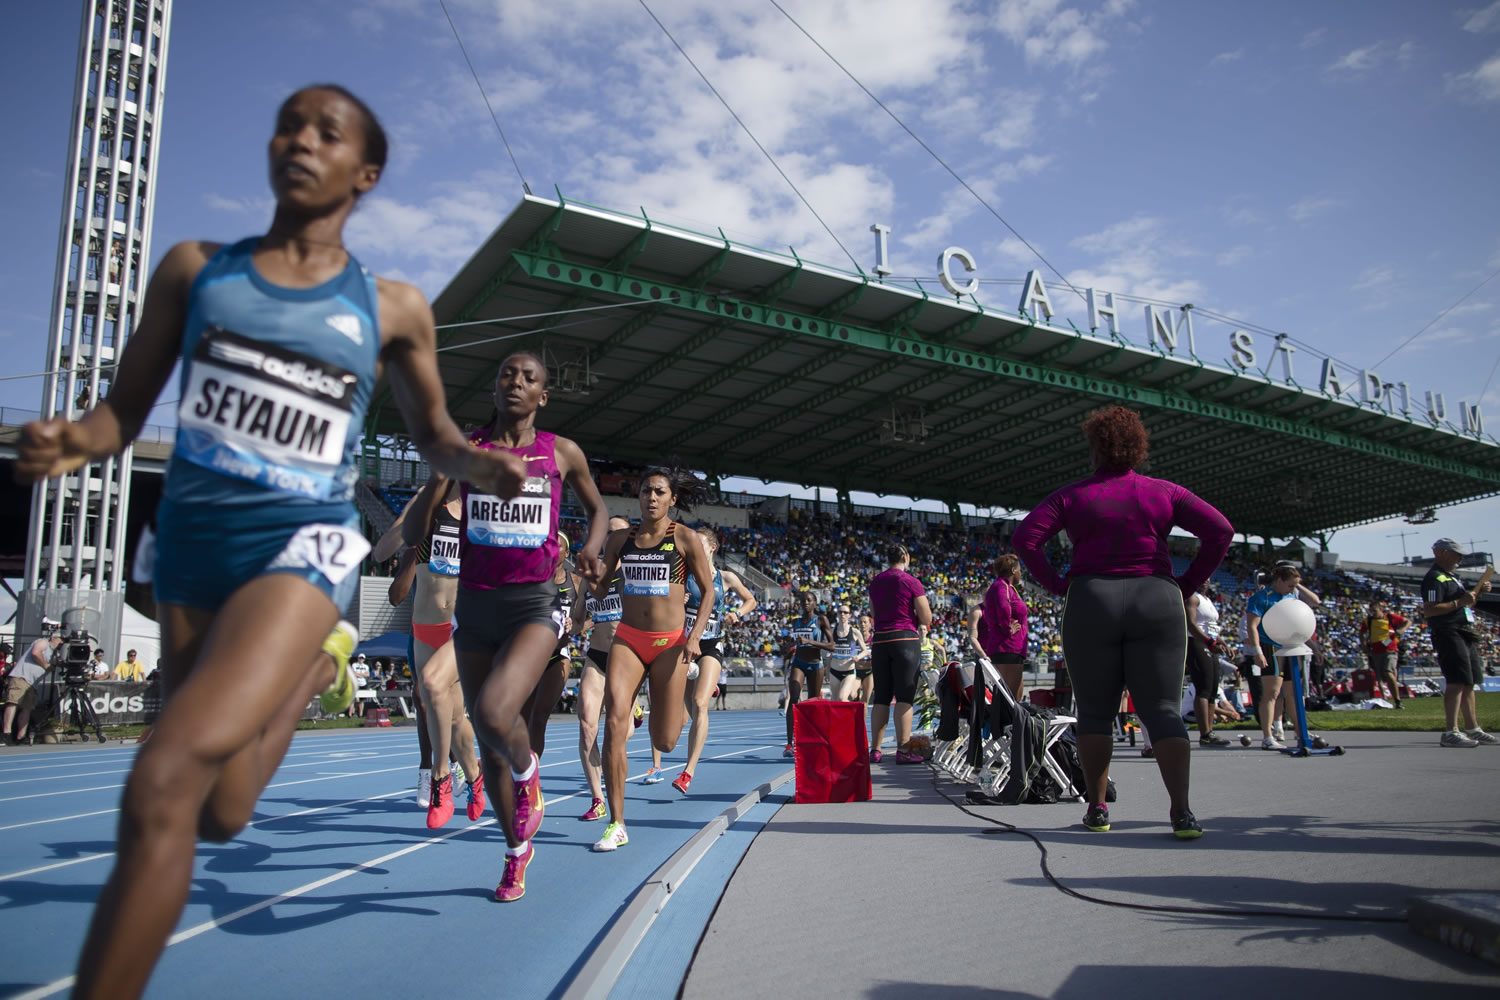 Competitors pass the shot-put area during the women's 1500 meters during the IAAF Diamond League Grand Prix competition on Randall's Island, Saturday in New York.